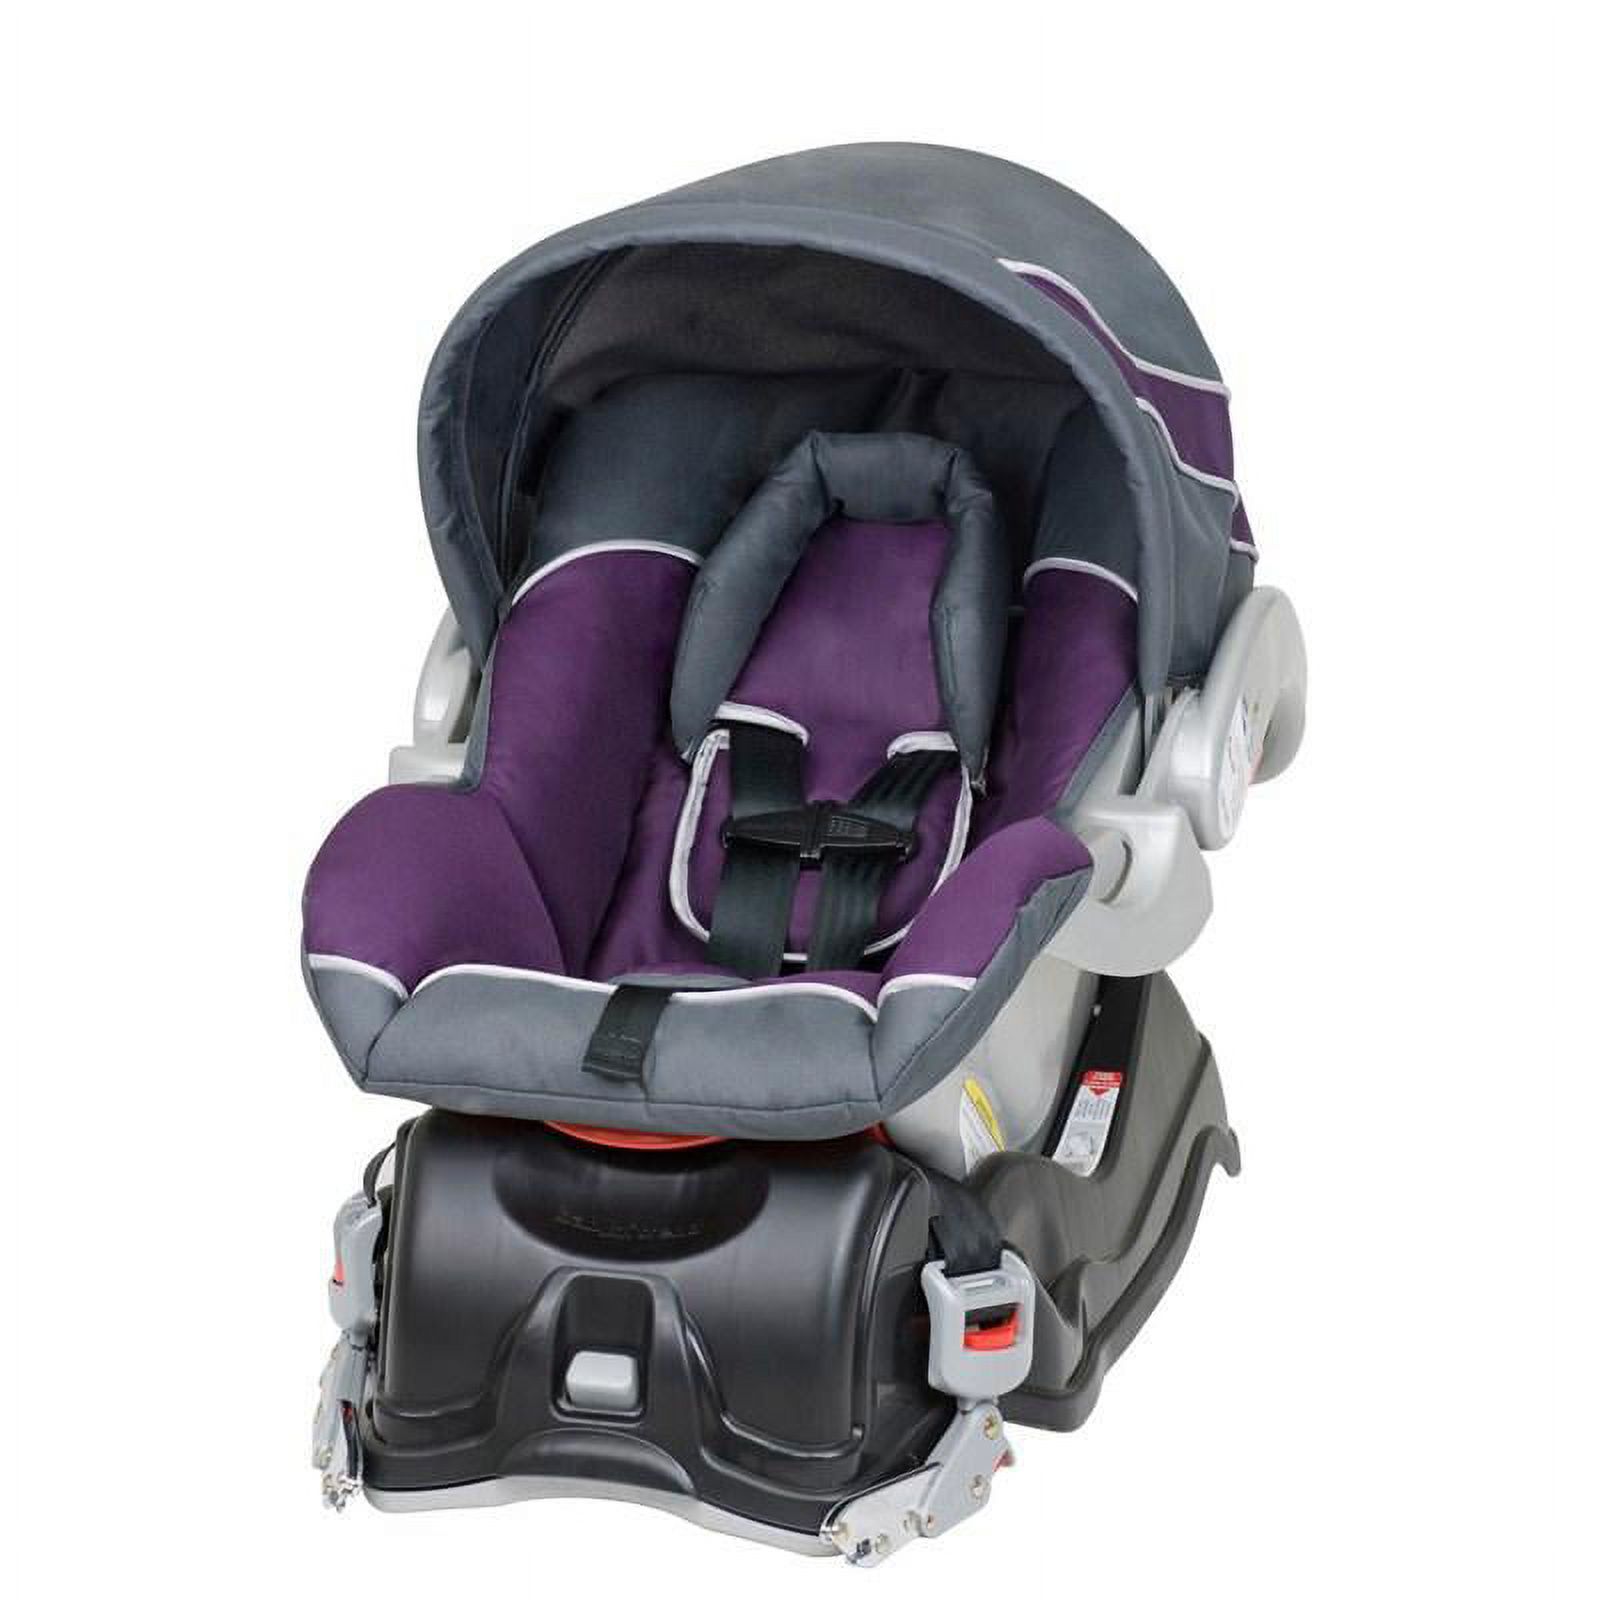 Baby Trend Expedition Travel System Stroller, Elixer - image 5 of 9